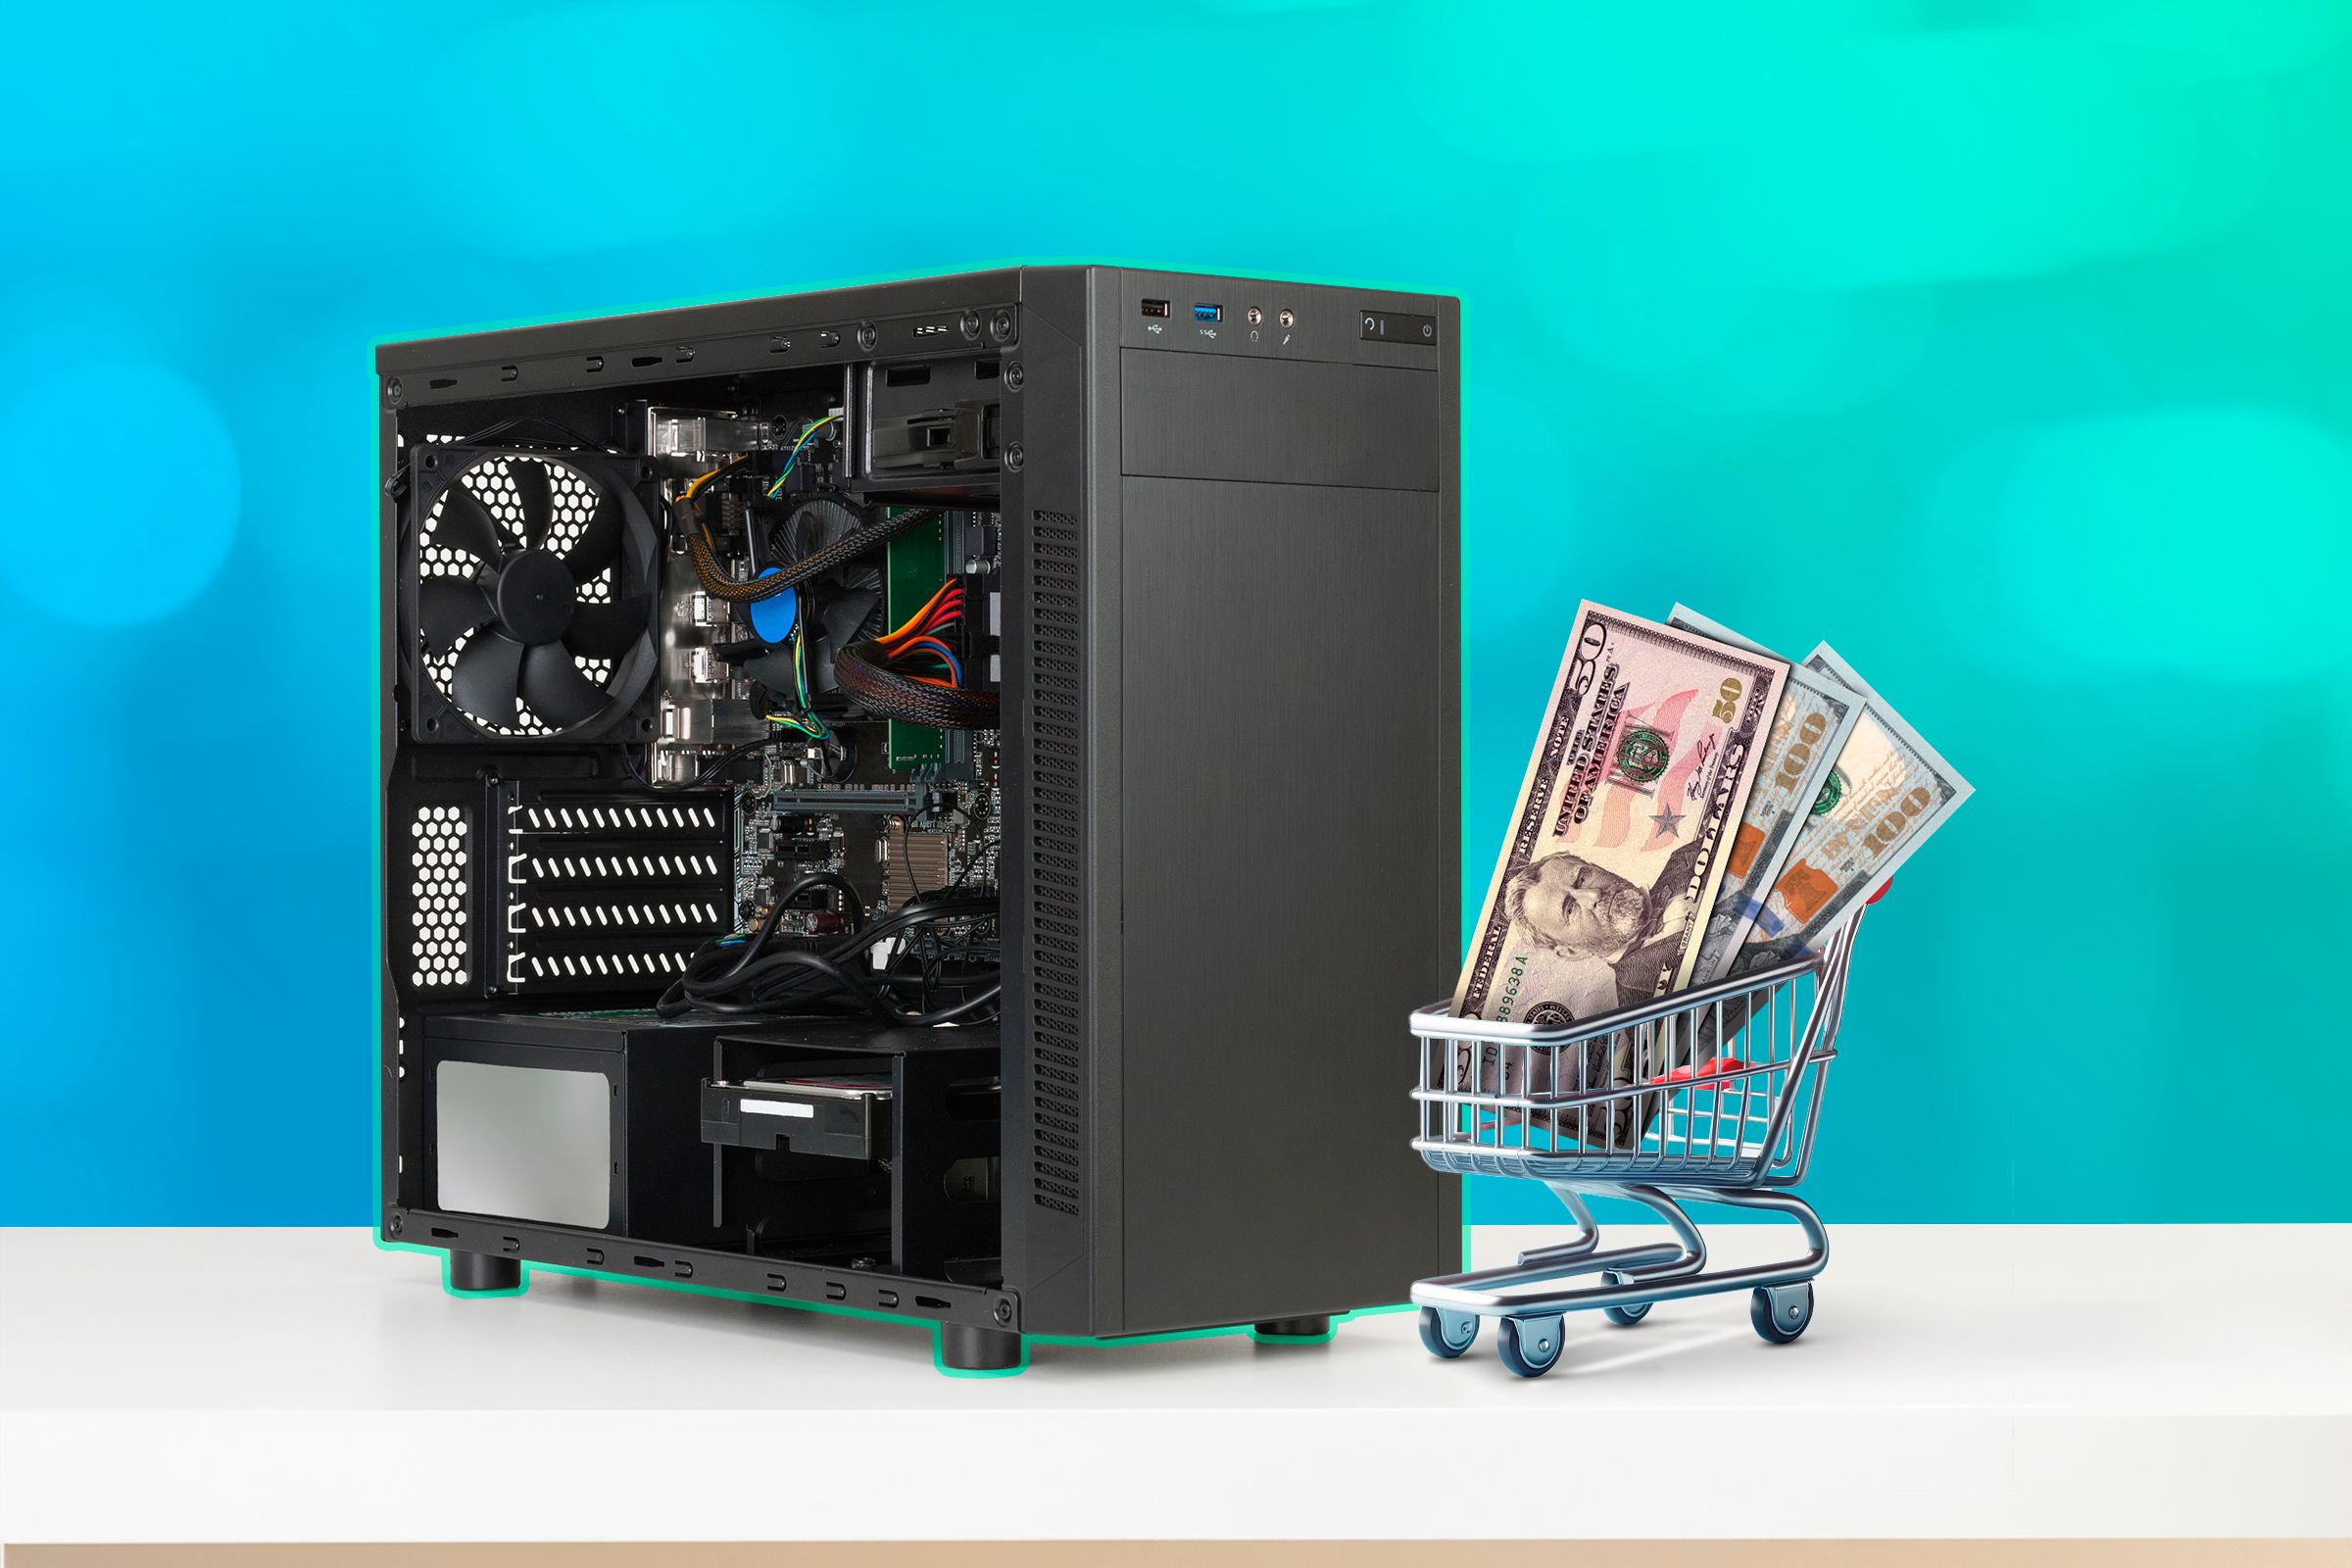 A computer case and a miniature shopping cart with some dollar bills.